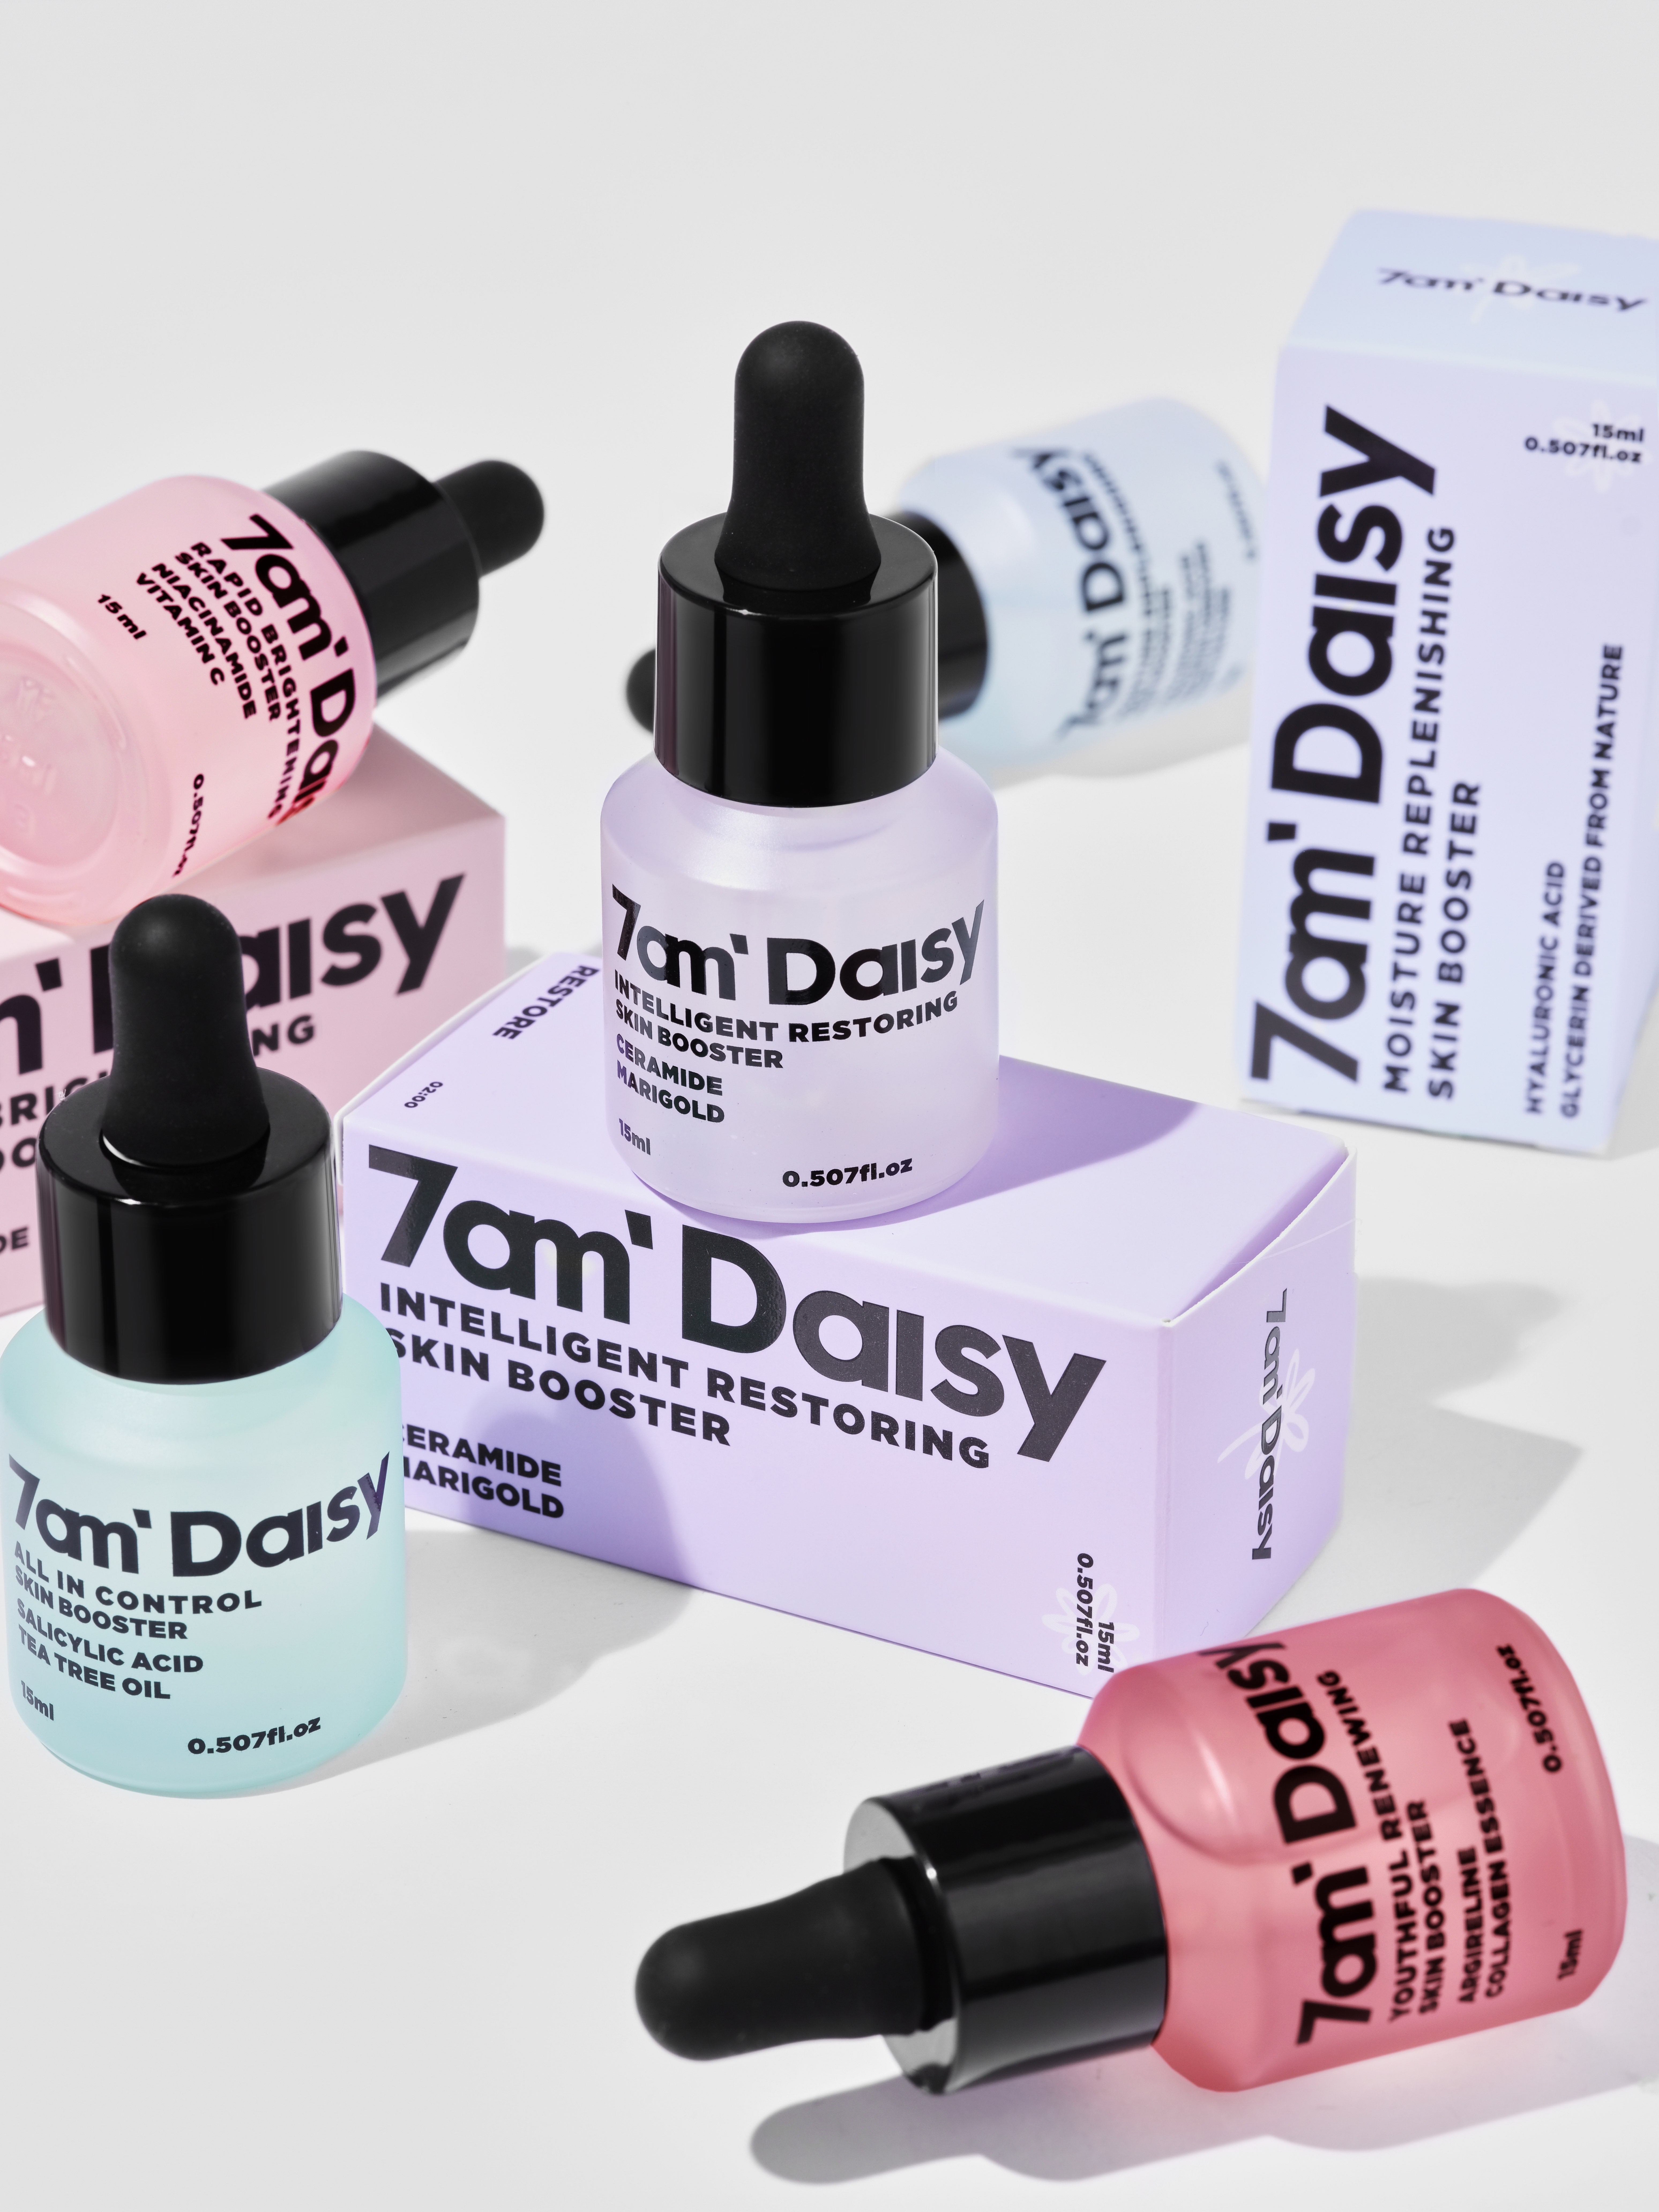 7am Daisy Product Brand and Packaging Design Design by Blanko Design Studio